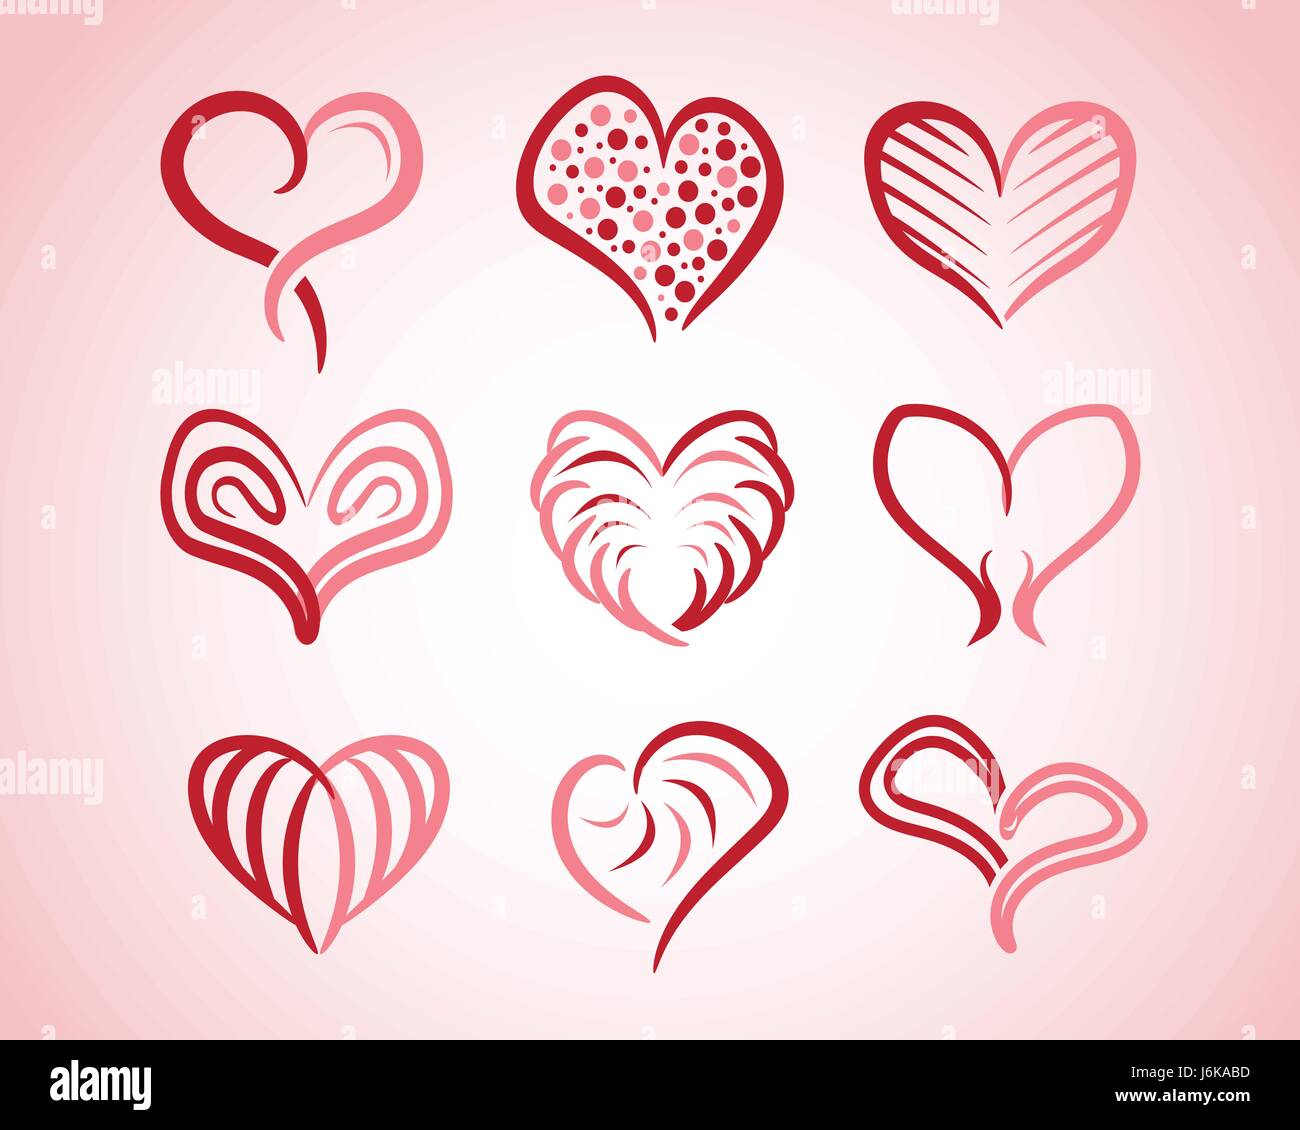 collection of hearts with different styles included elegant,modern and beautiful hearts , dotted heart,outlines heart, furry heart Stock Vector